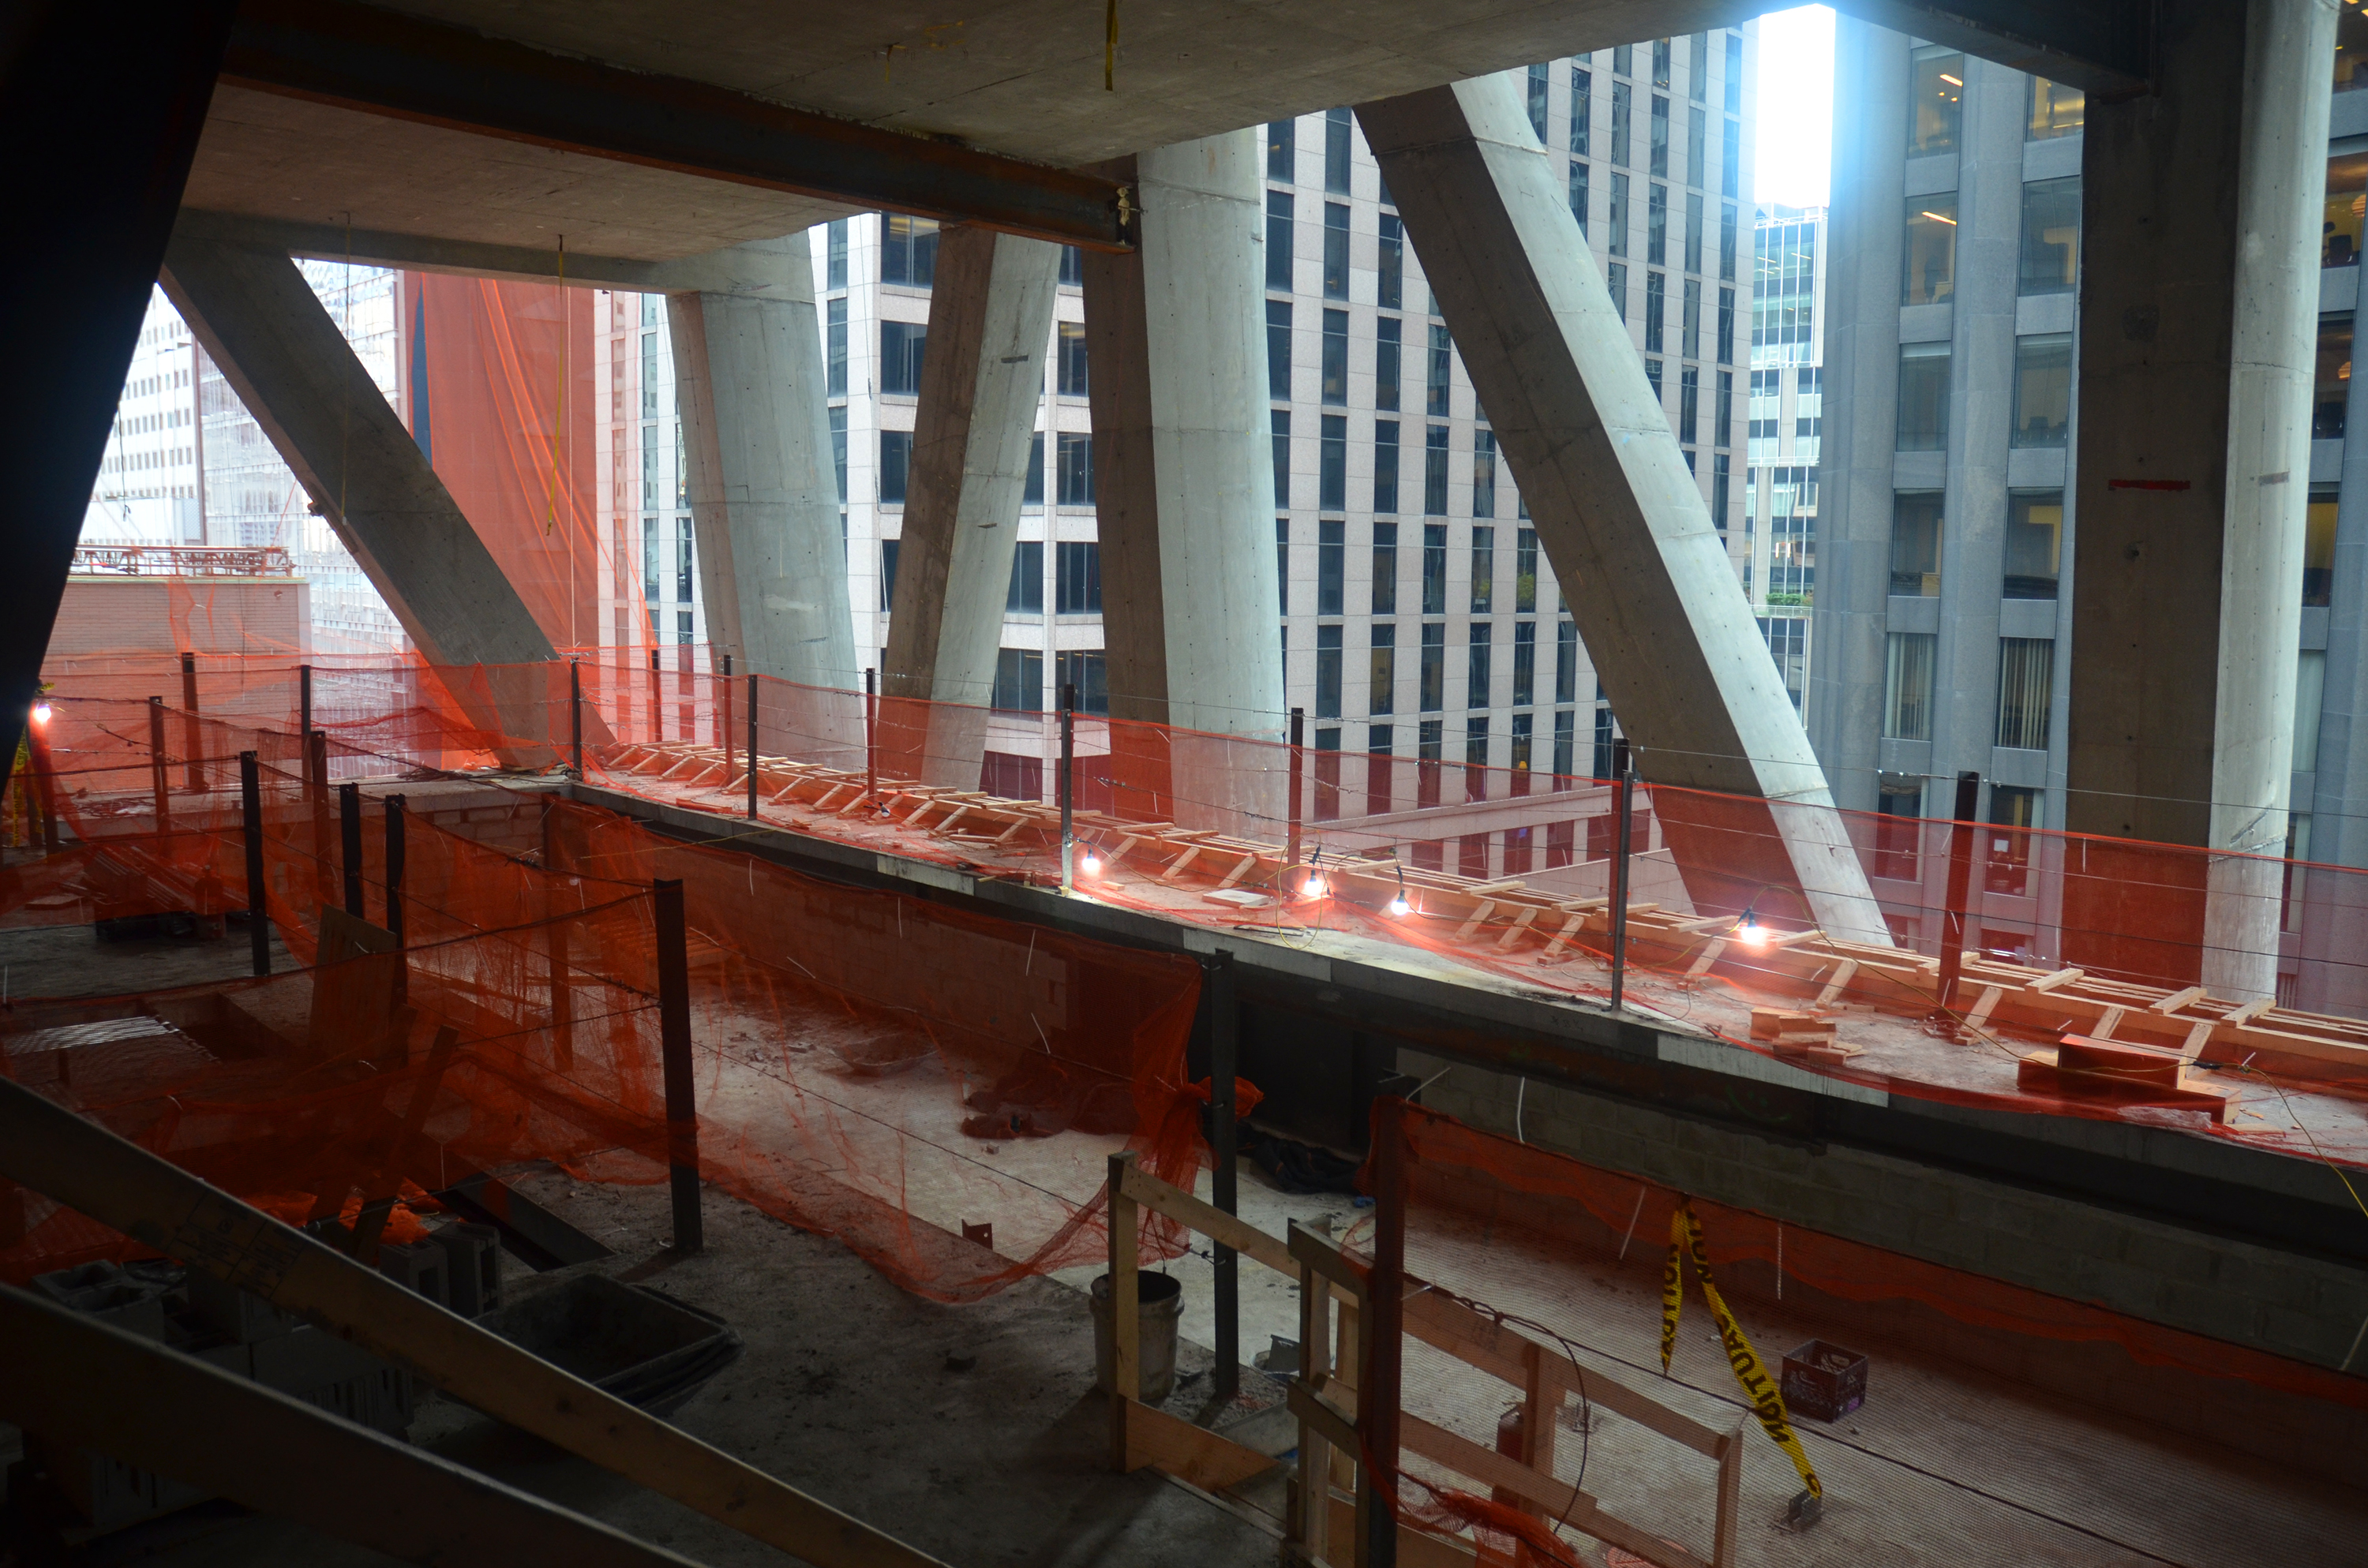 Swimming pool under construction at 53W53